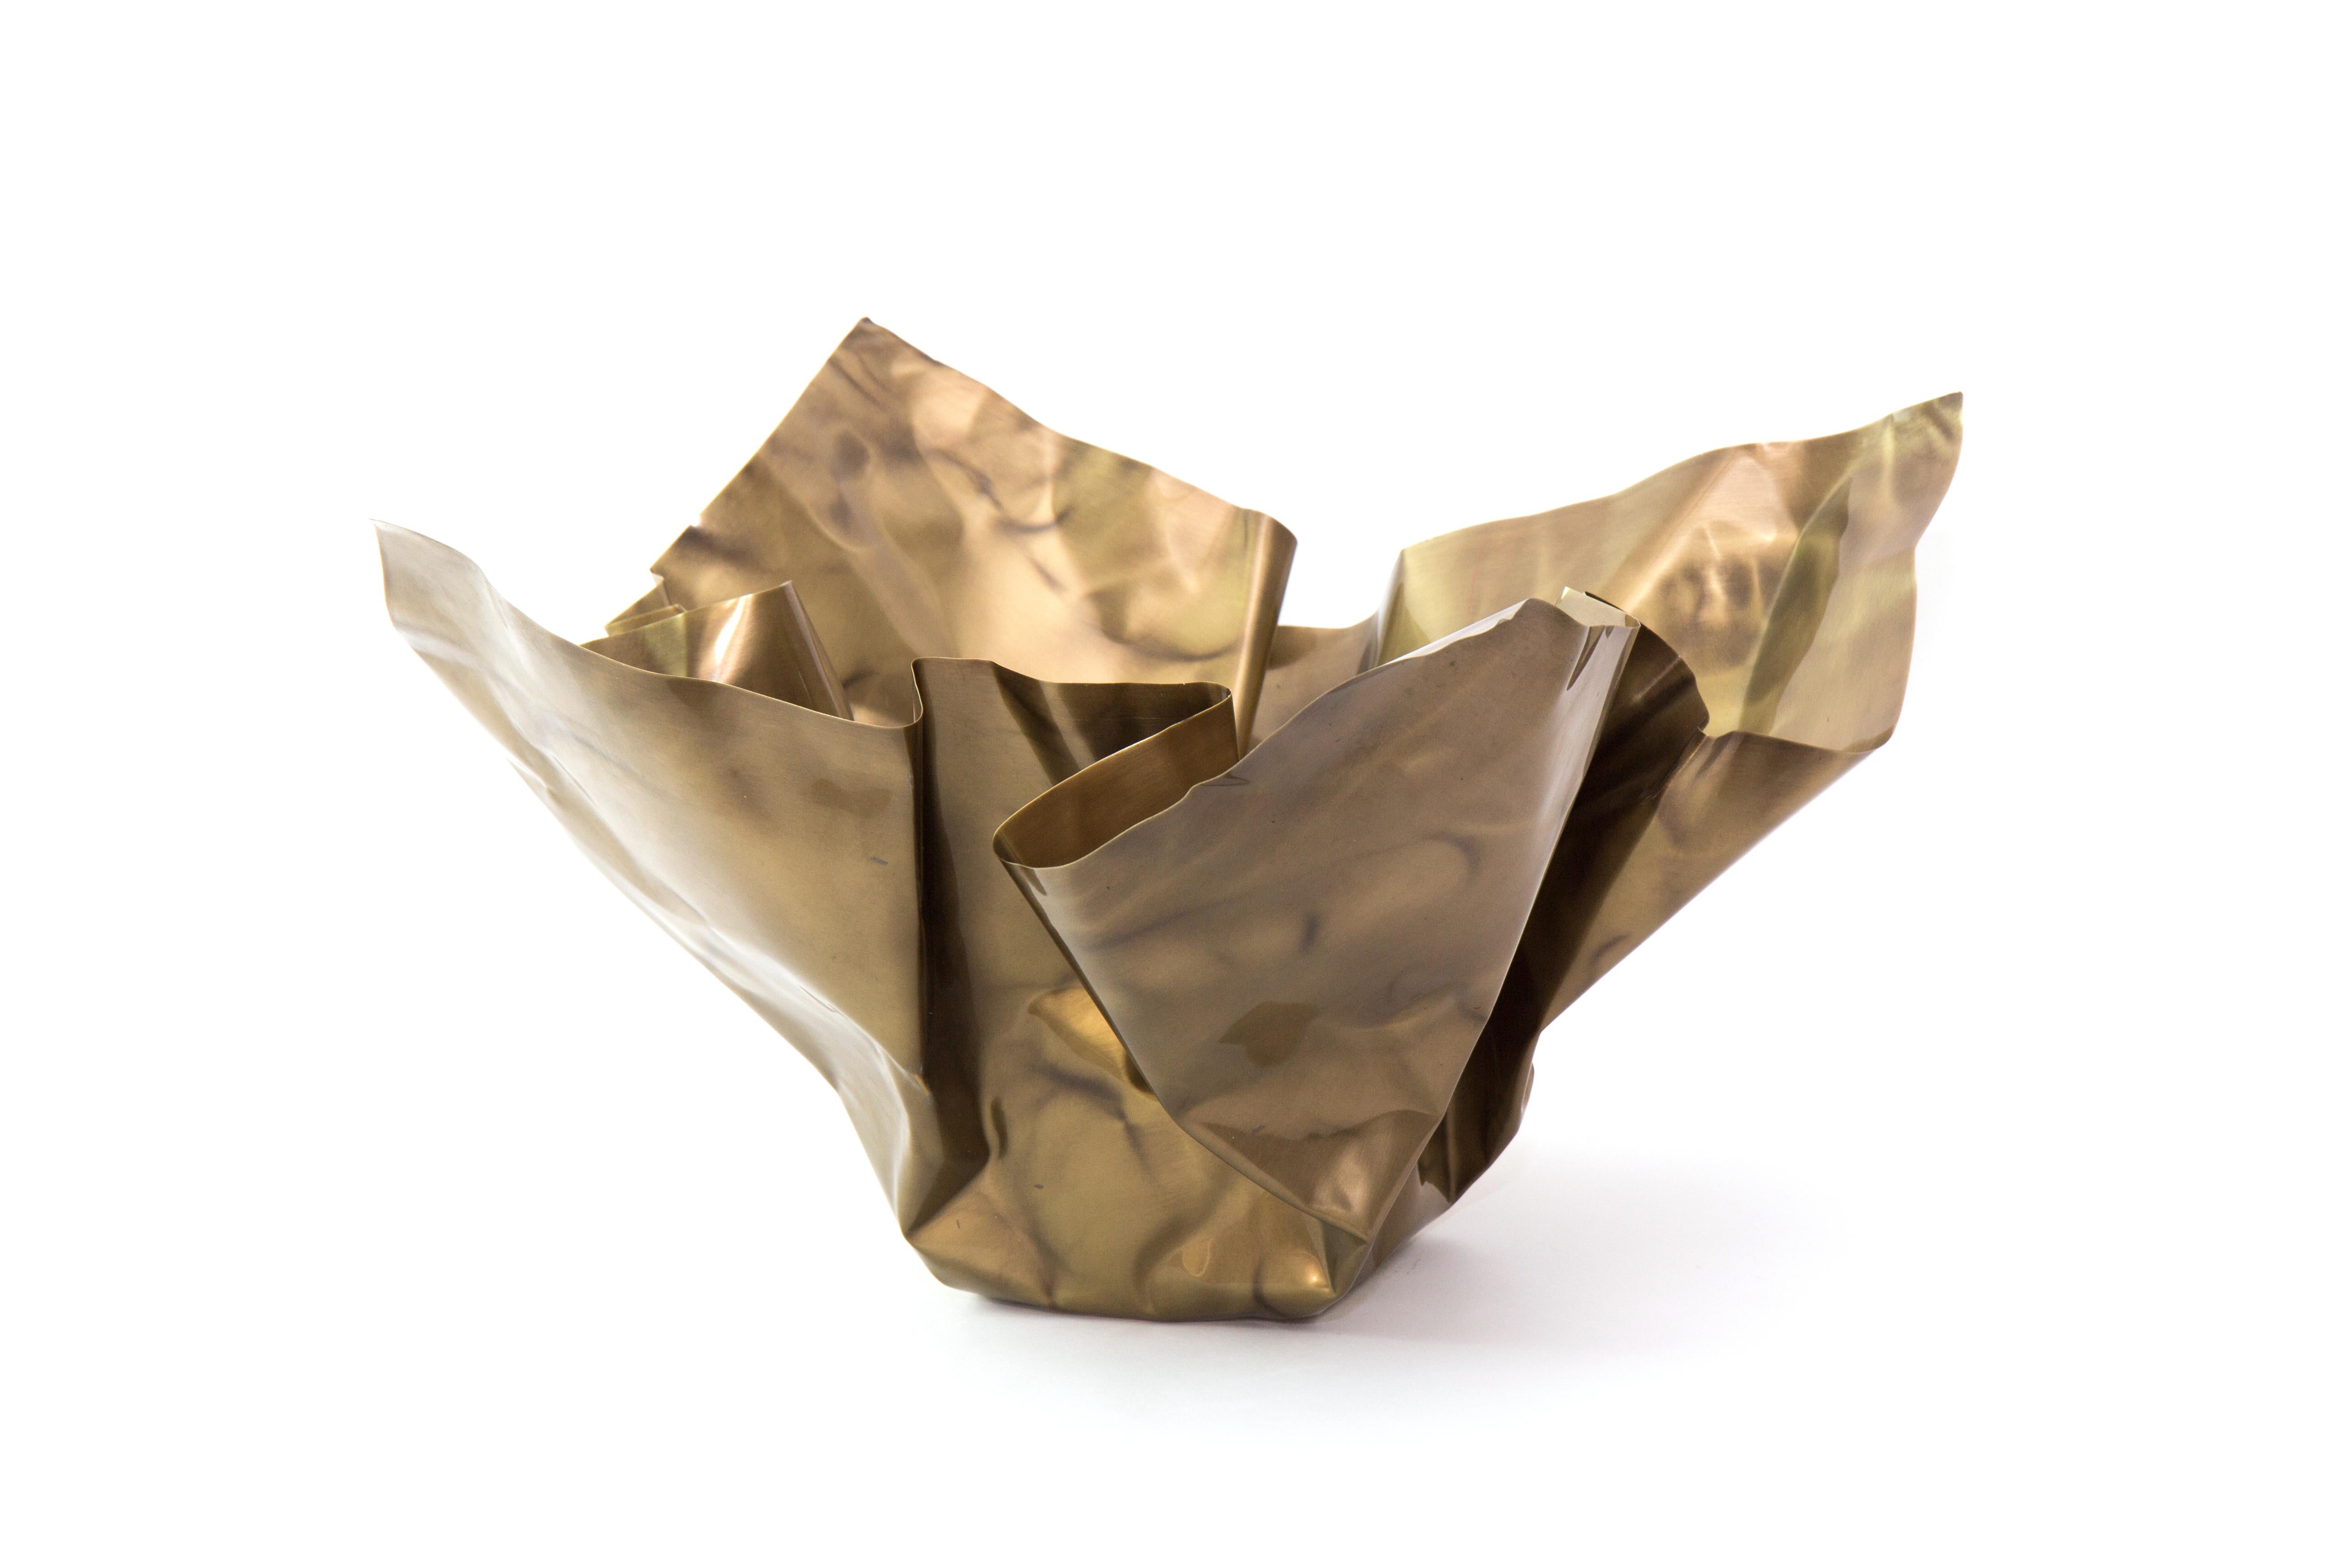 Paper brass bowl III by Gentner Design
Dimensions: D 50 x W 50 x H 25.5 cm
Materials: tarnished brass
Available in tarnished brass and darkened brass.

The Paper Series embodies the idea of crumpling paper set in time. The materiality of the brass